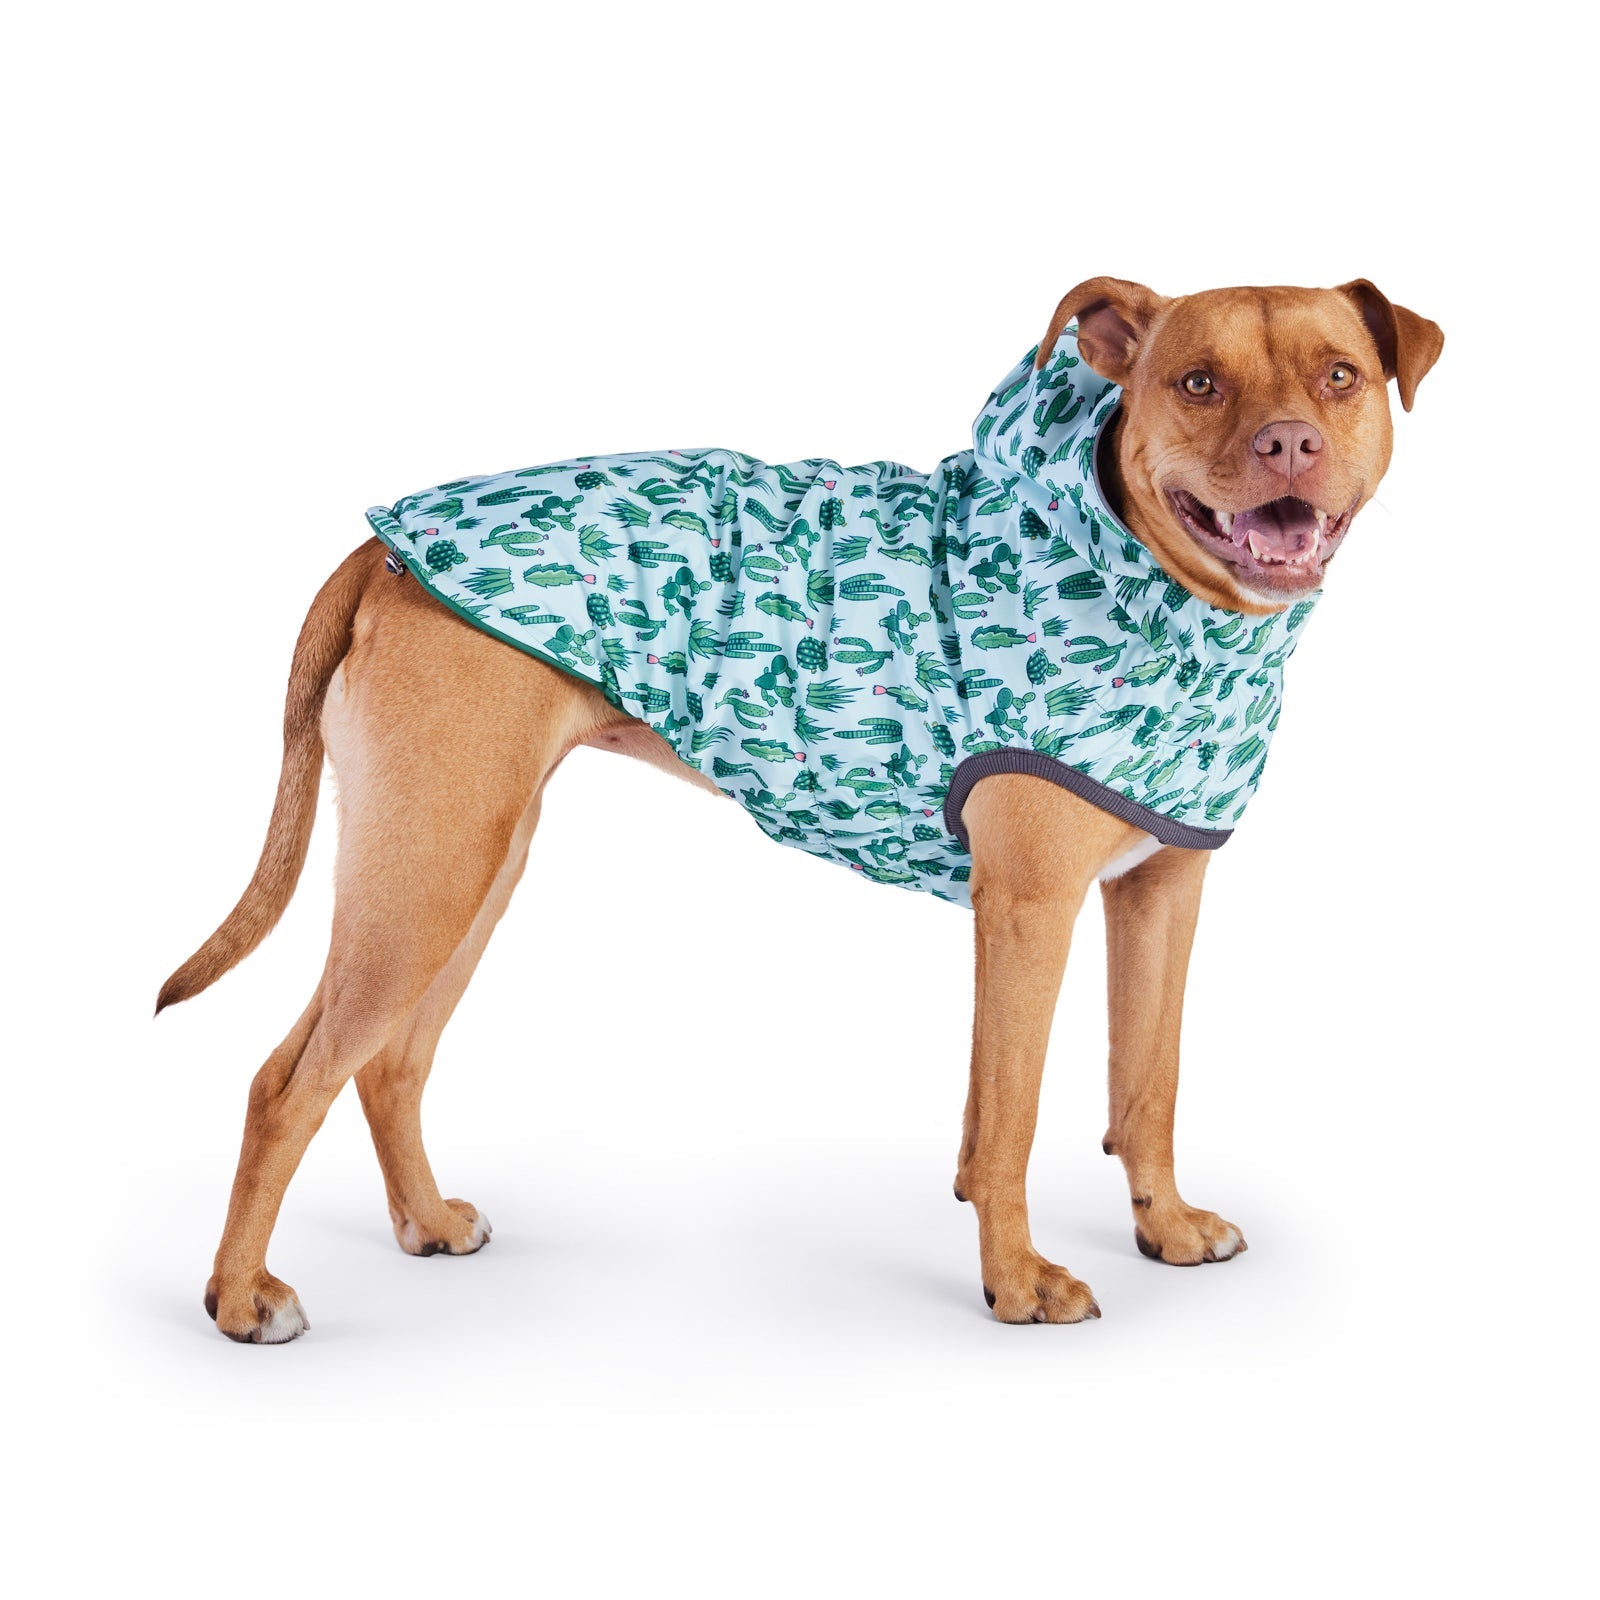 A golden pit bull-type dog wearing a light blue and green cactus print raincoat, standing on a white background